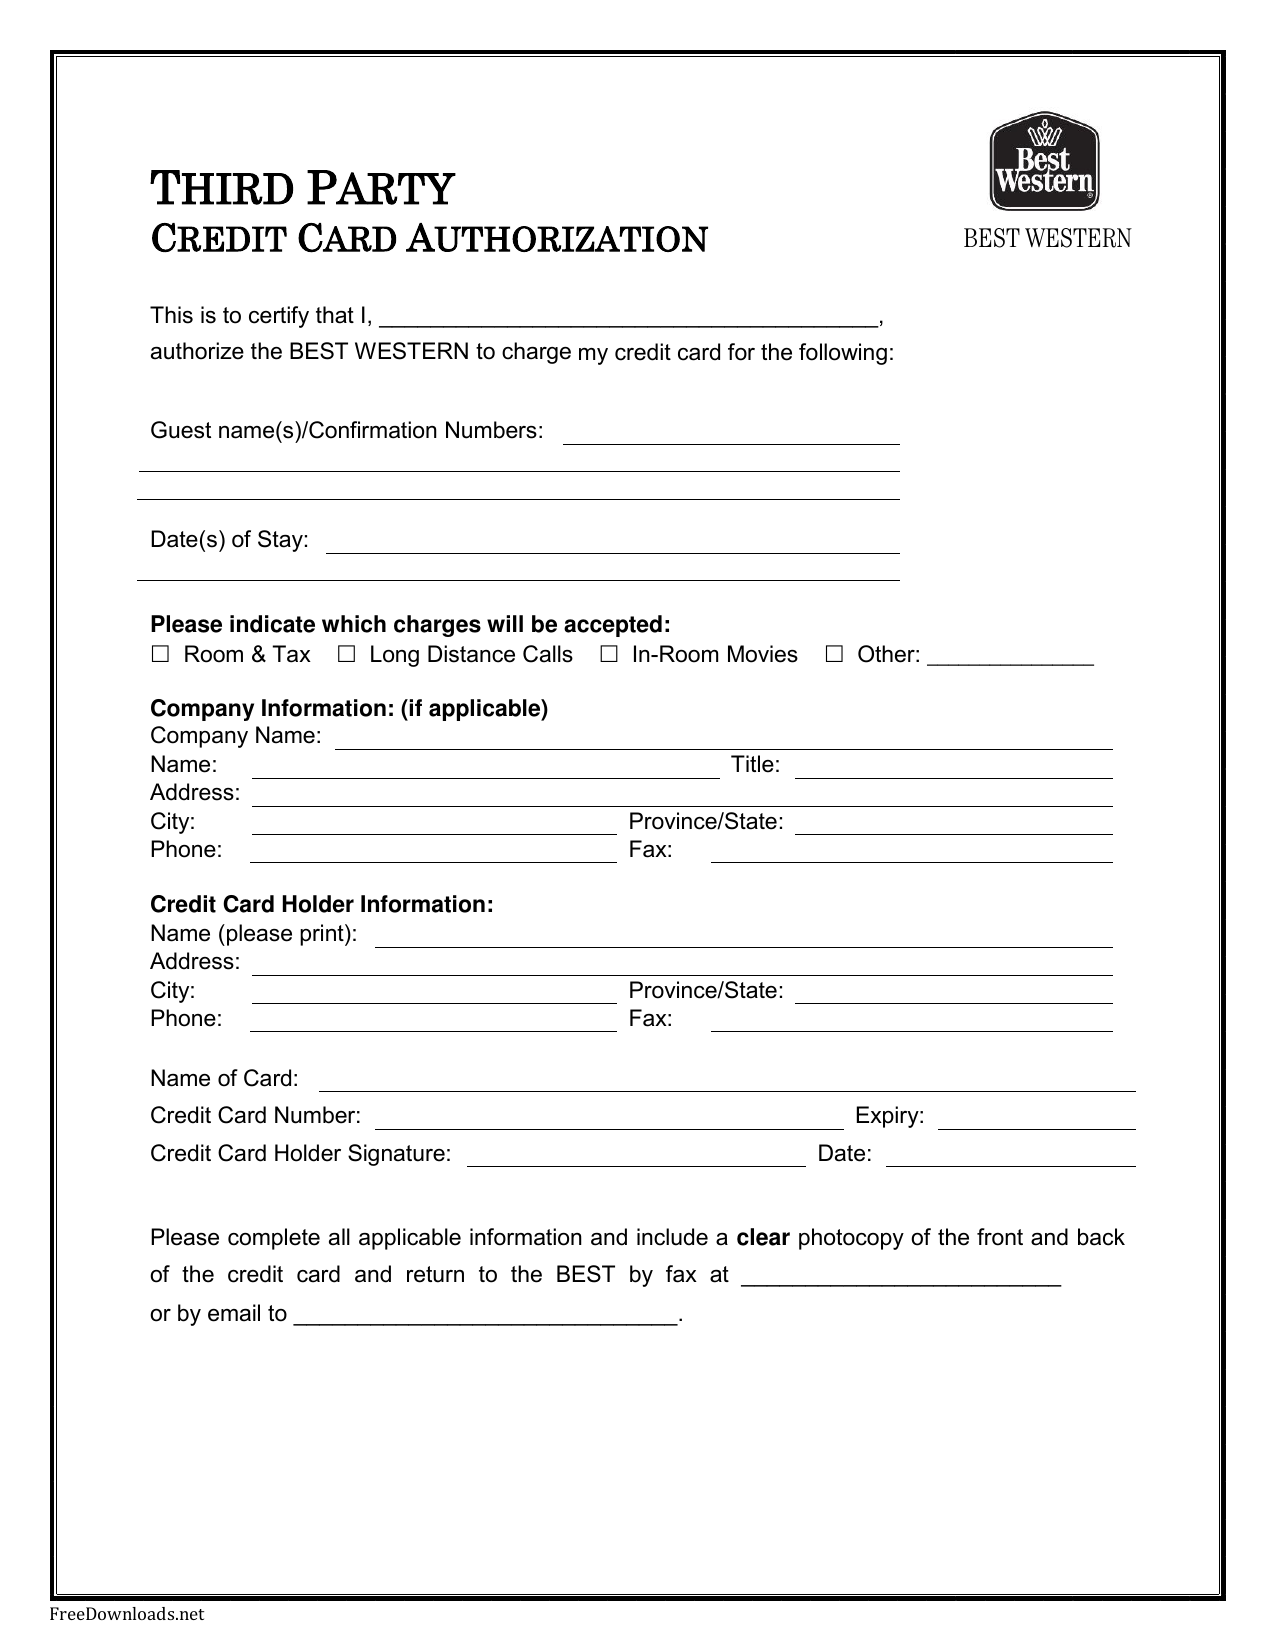 Download Best Western Credit Card Authorization Form Template With Regard To Authorization To Charge Credit Card Template